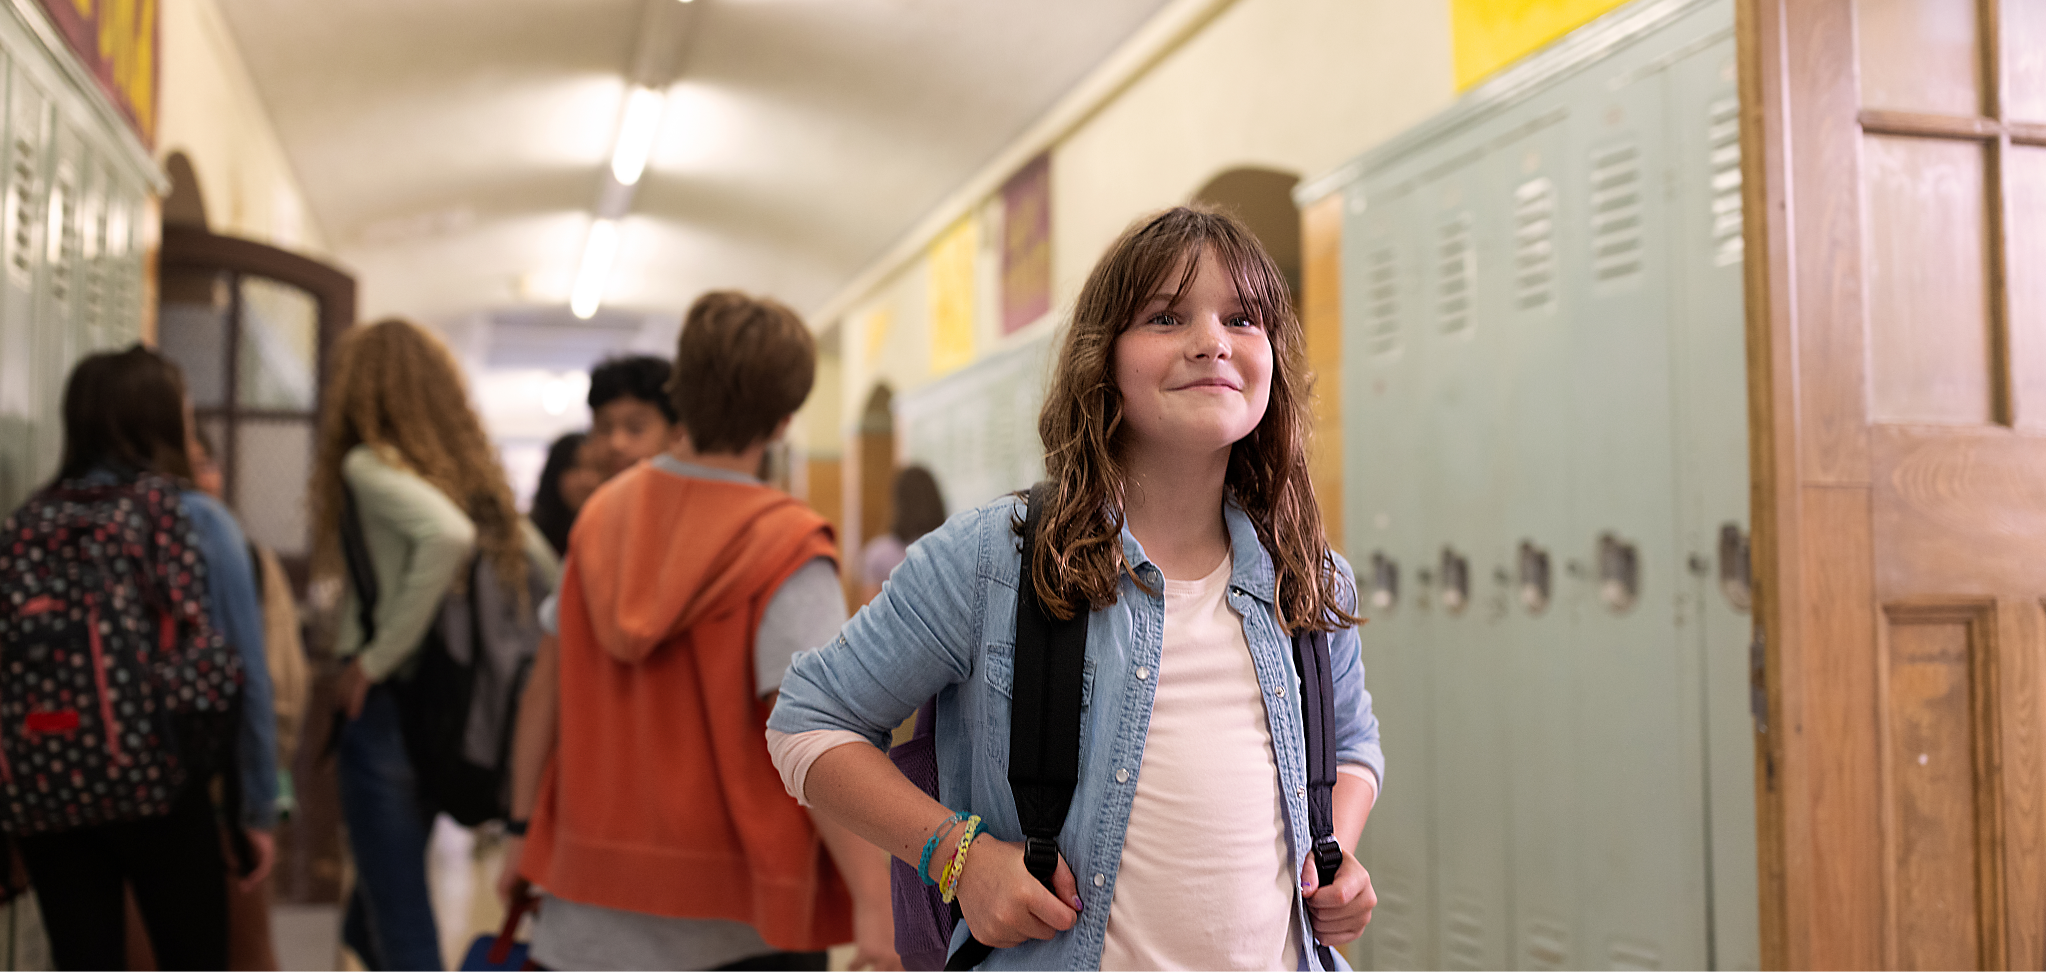 A smiling child in a school hallway with other kids behind them